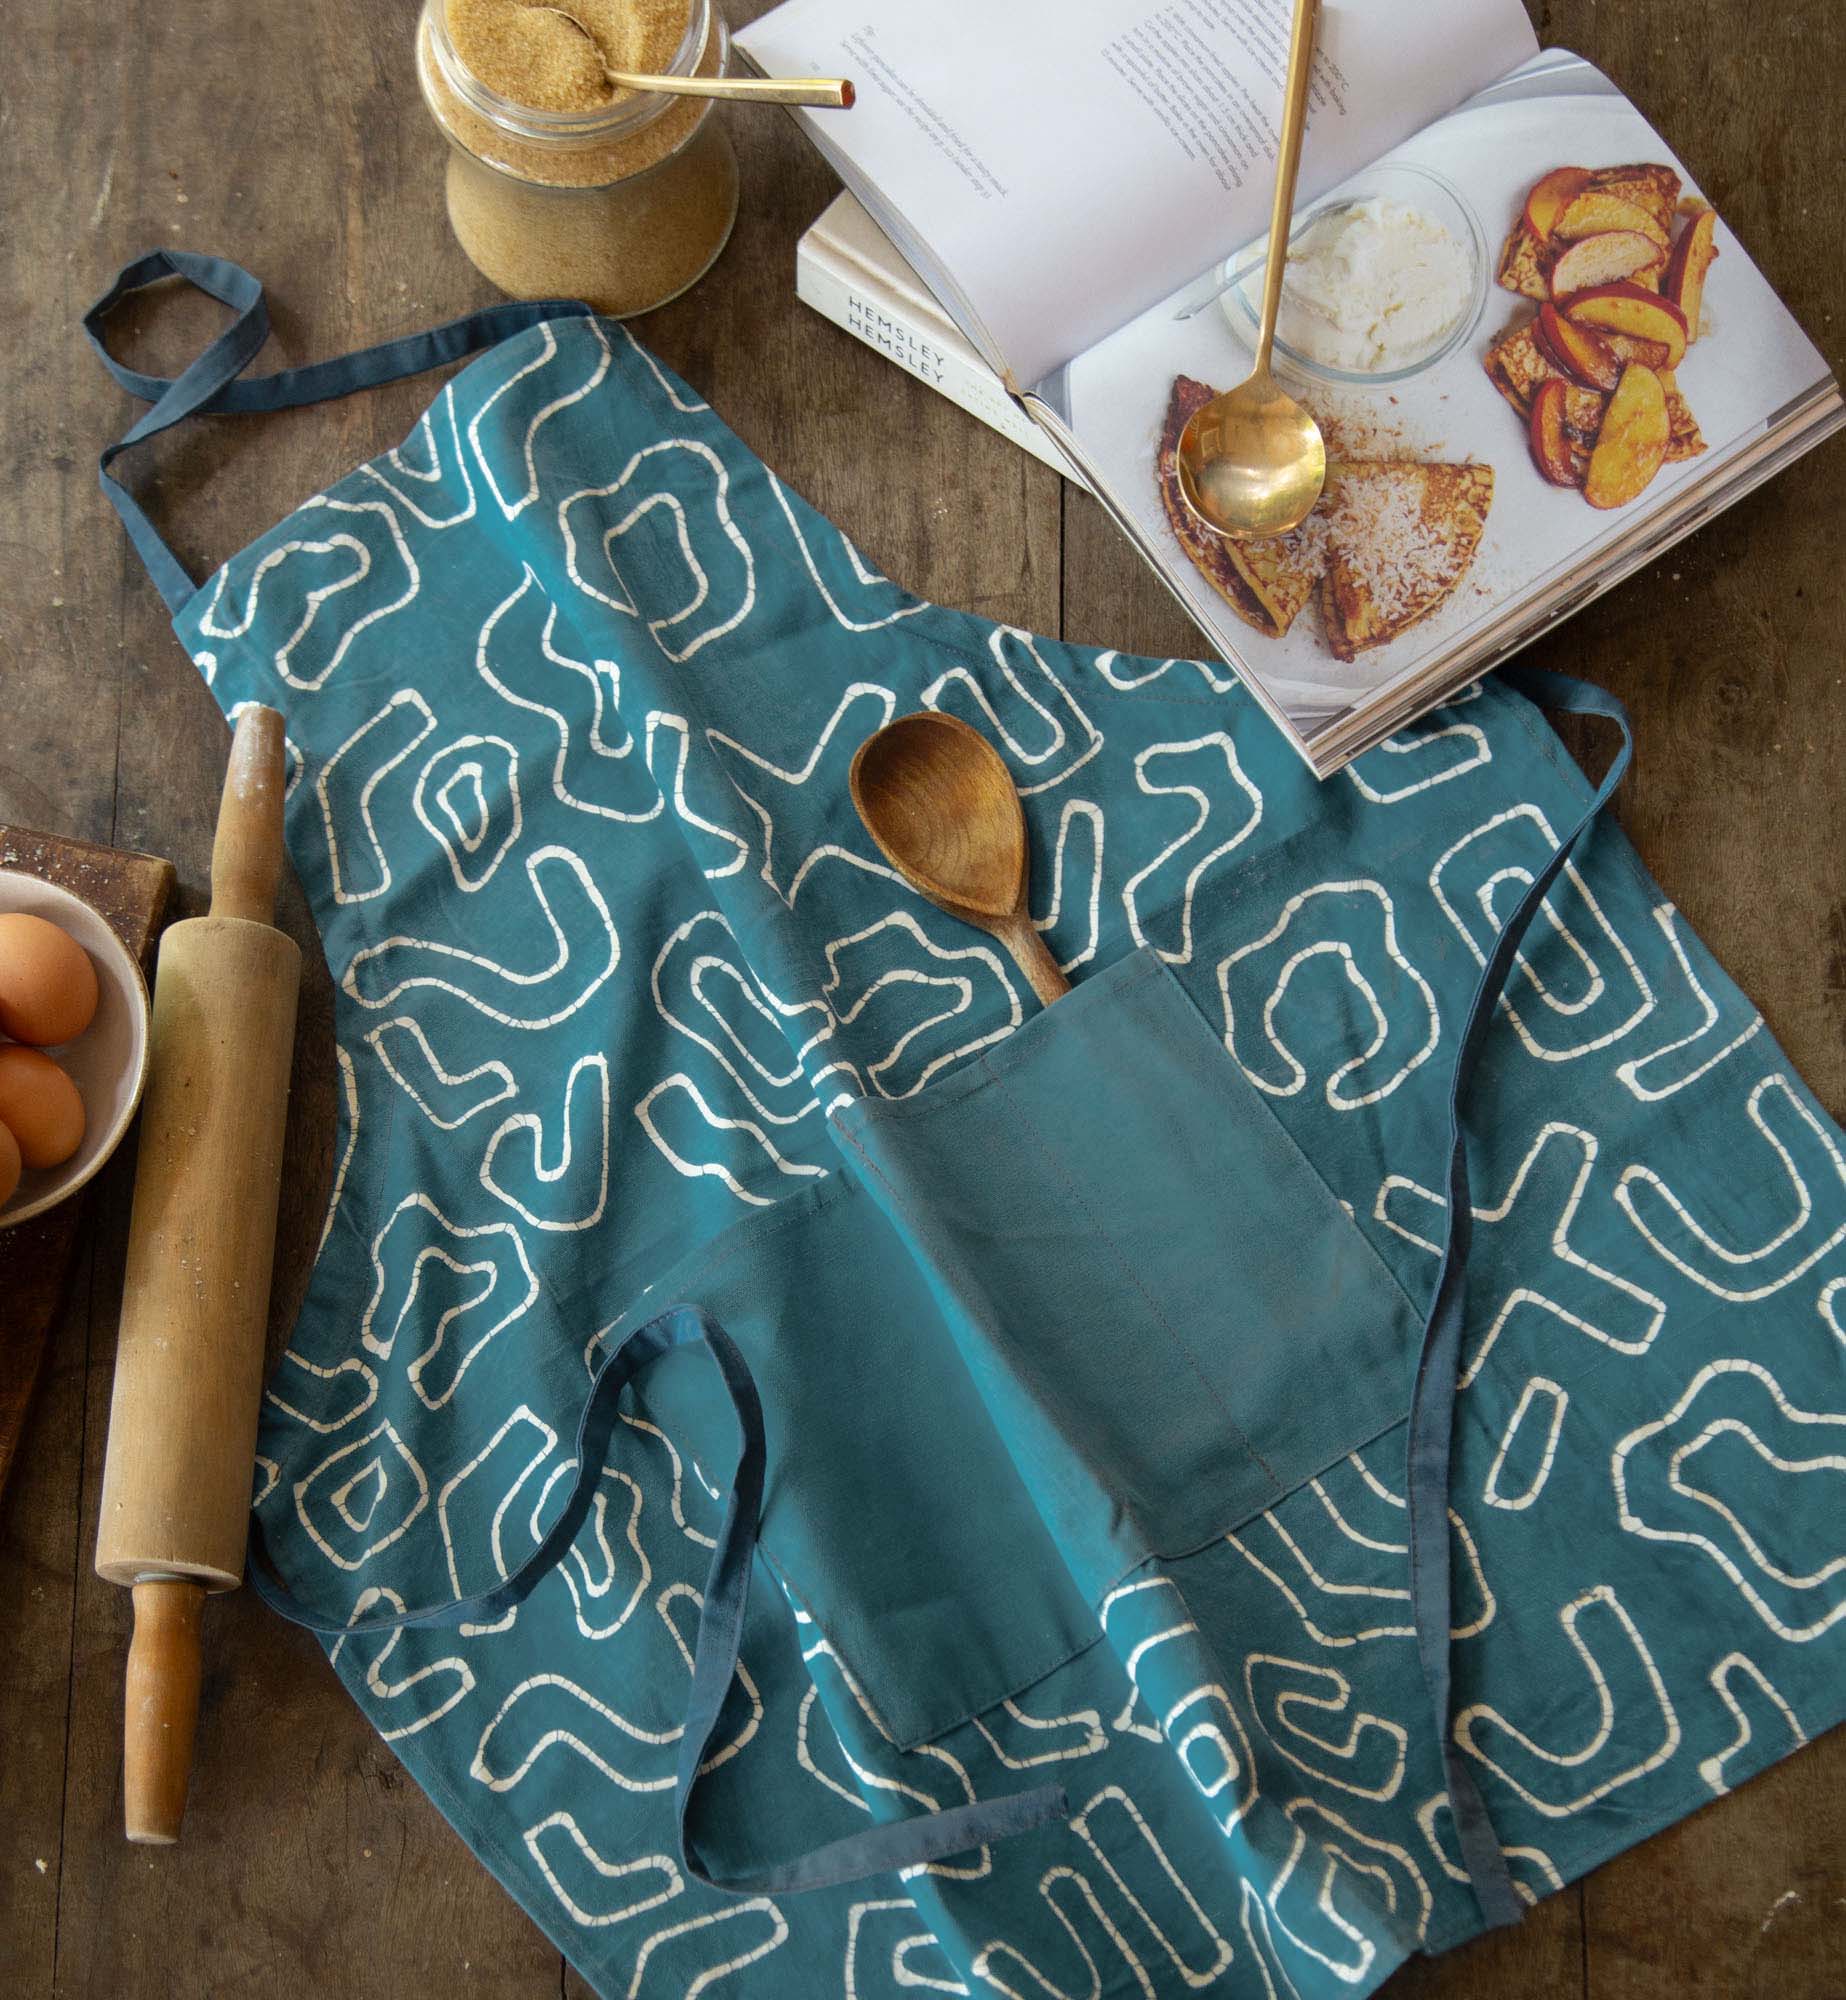 Kuba Blues Outline Teal Apron - Handmade by TRIBAL TEXTILES - Handcrafted Home Decor Interiors - African Made